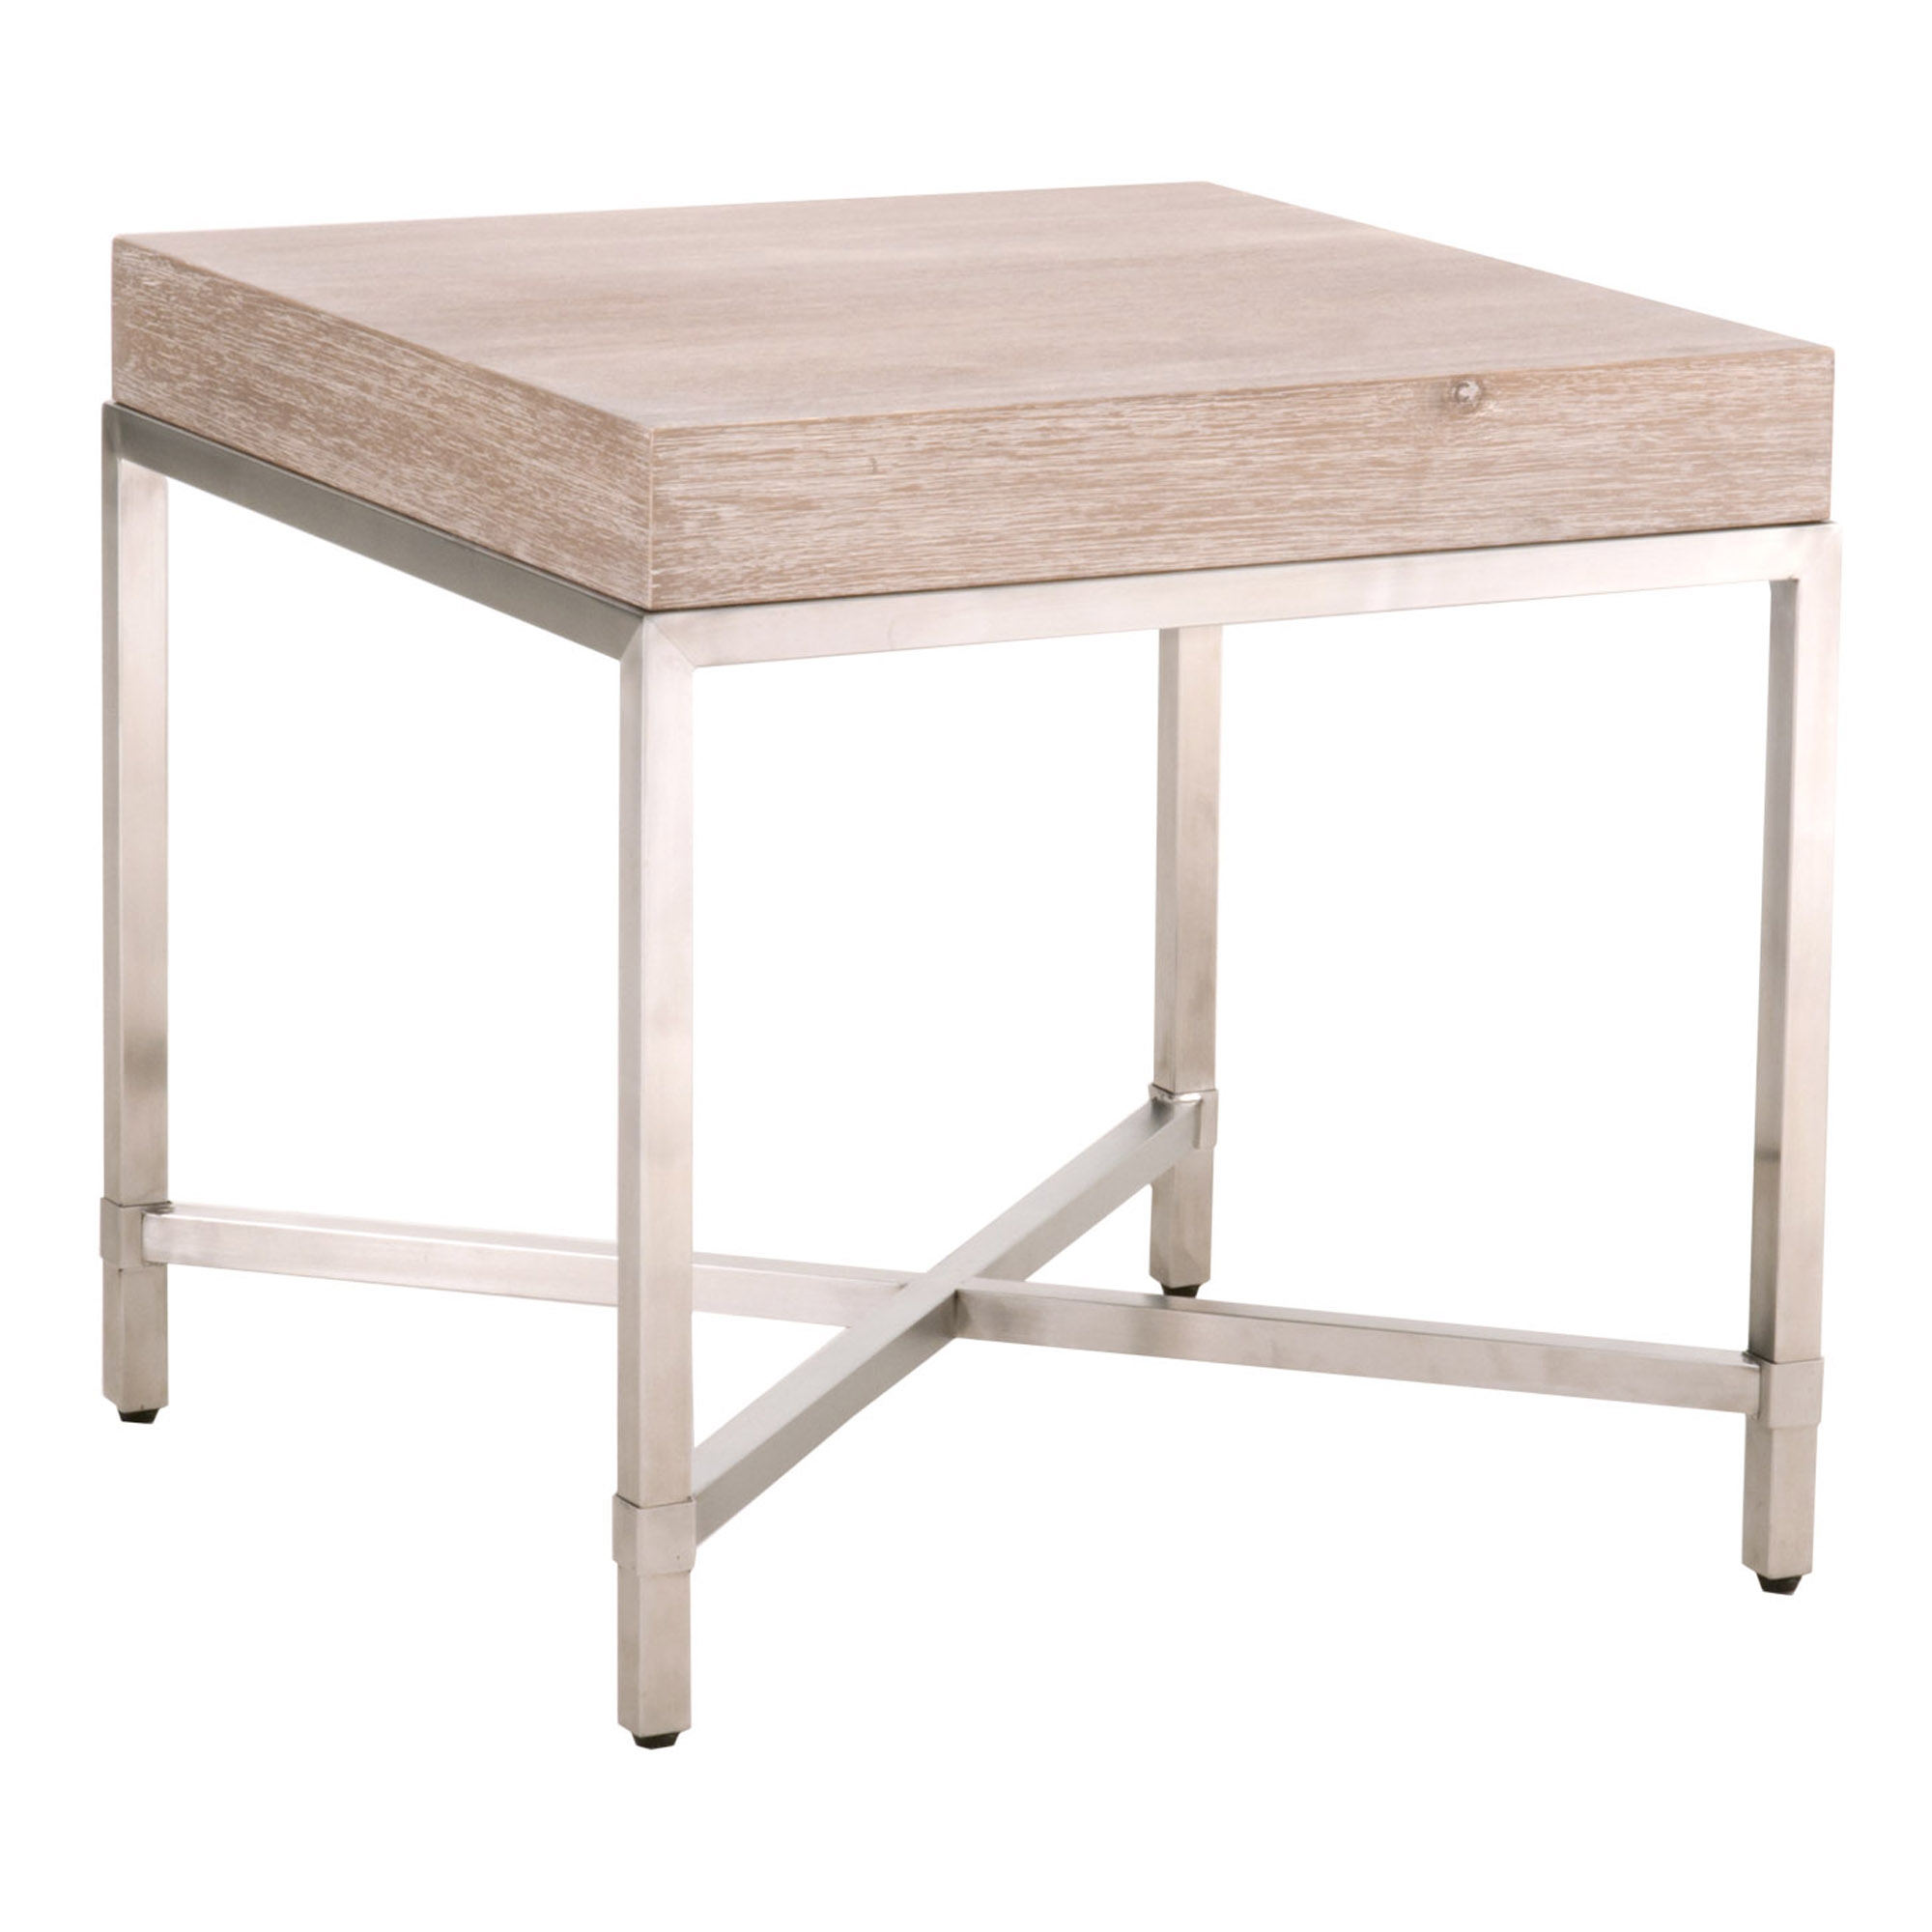 Strand End Table - Image 1